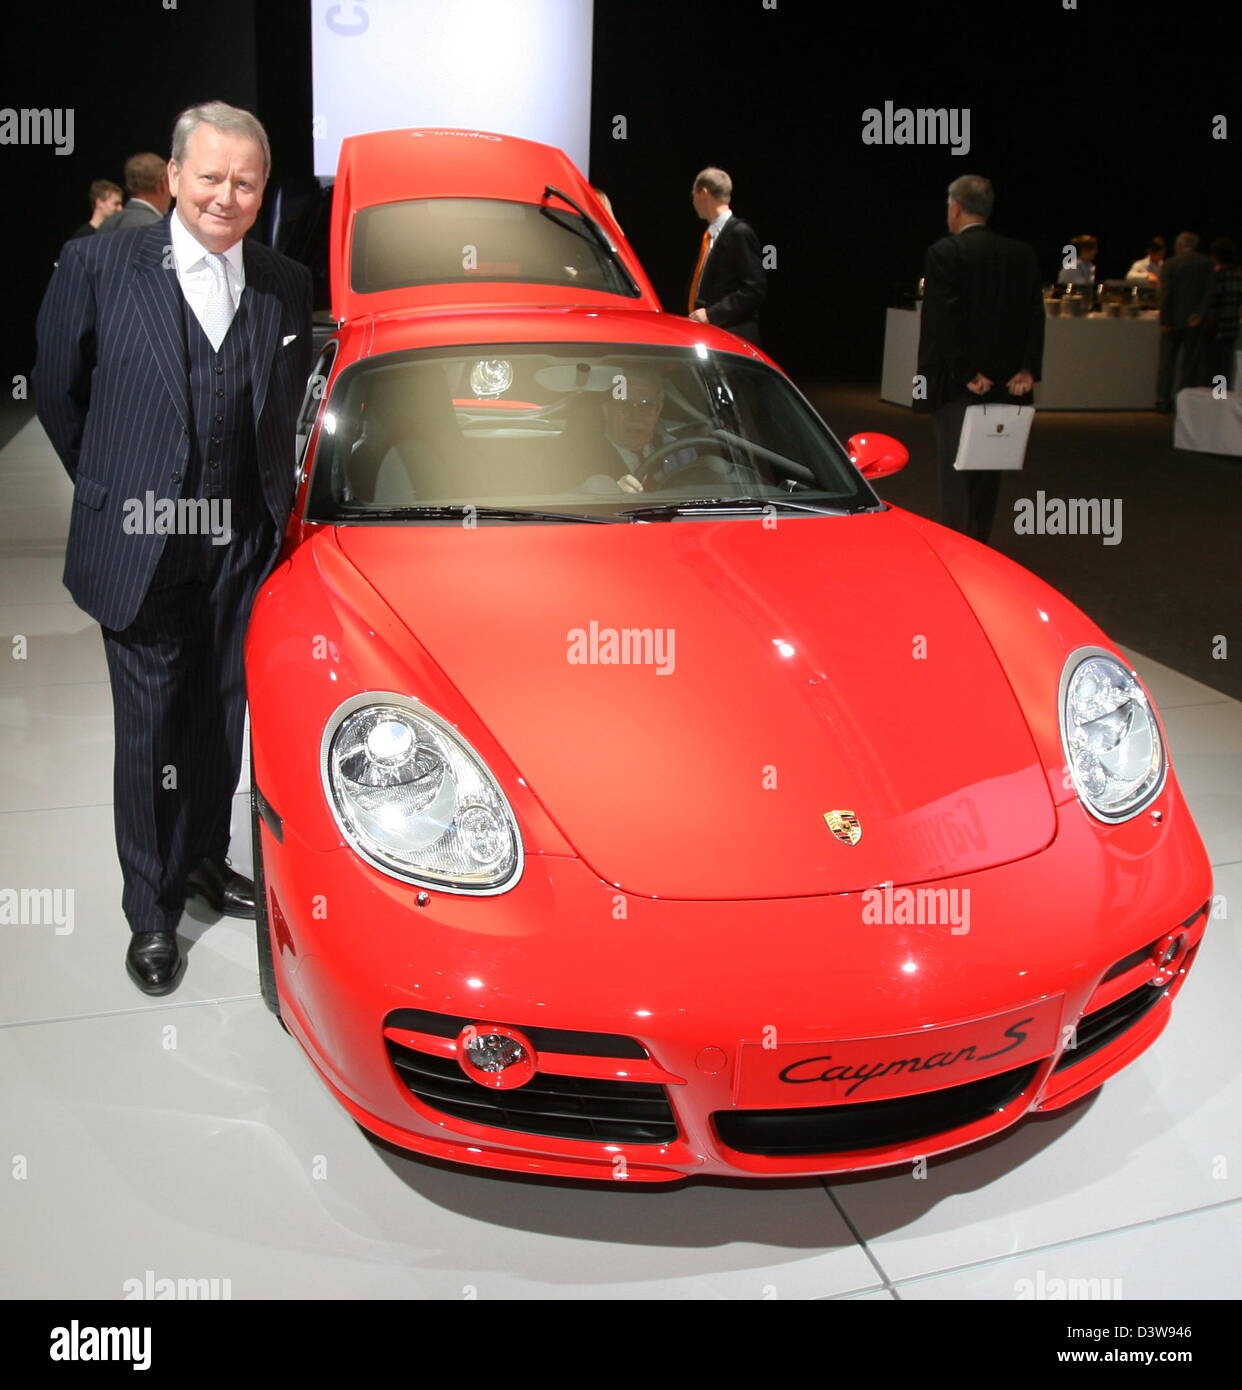 Wolfgang Porsche is pictured beside a Porsche Cayman S prior to the Porsche annual general meeting in Stuttgart, Germany, Friday 26 January 2007.Wolfgang Porsche was elected Chairman of the of Porsche Supervisory Board. Photo: Bernd Weissbrod Stock Photo